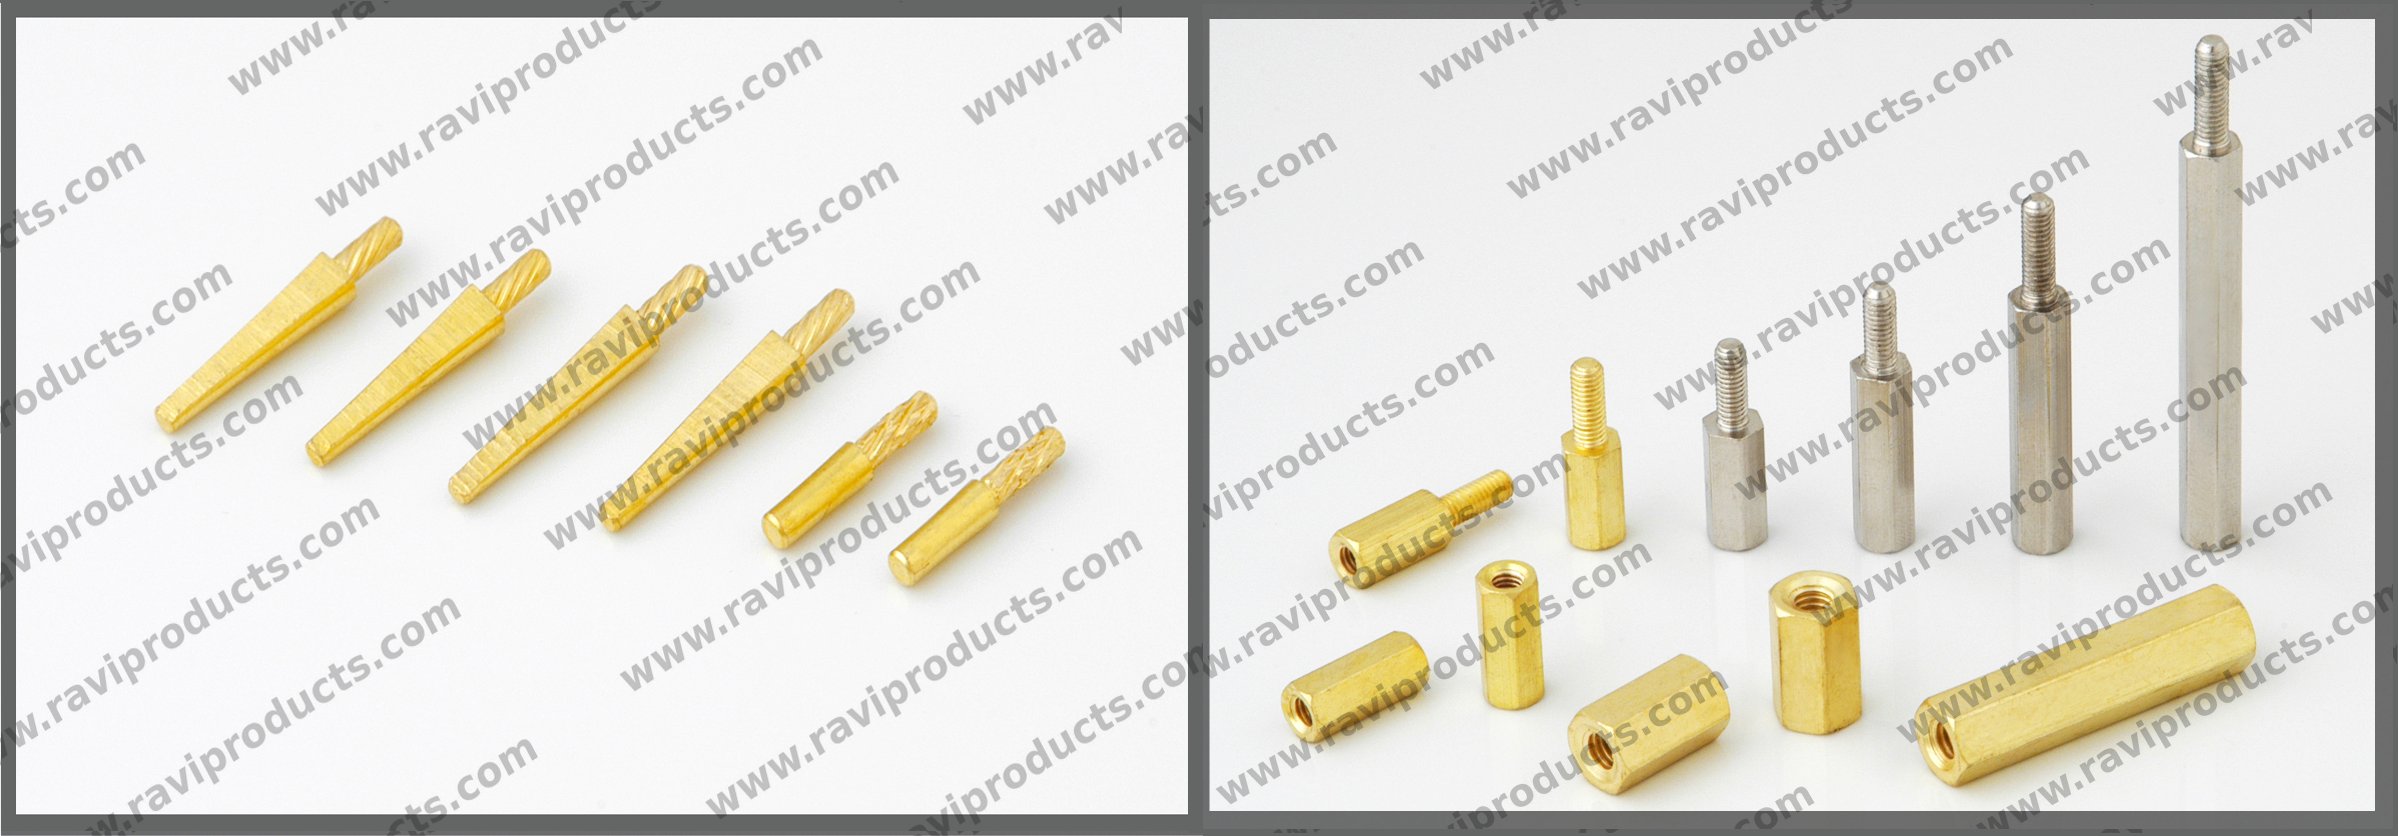 Manufacturers Exporters and Wholesale Suppliers of Brass Spacer and Pins Jamnagar Gujarat